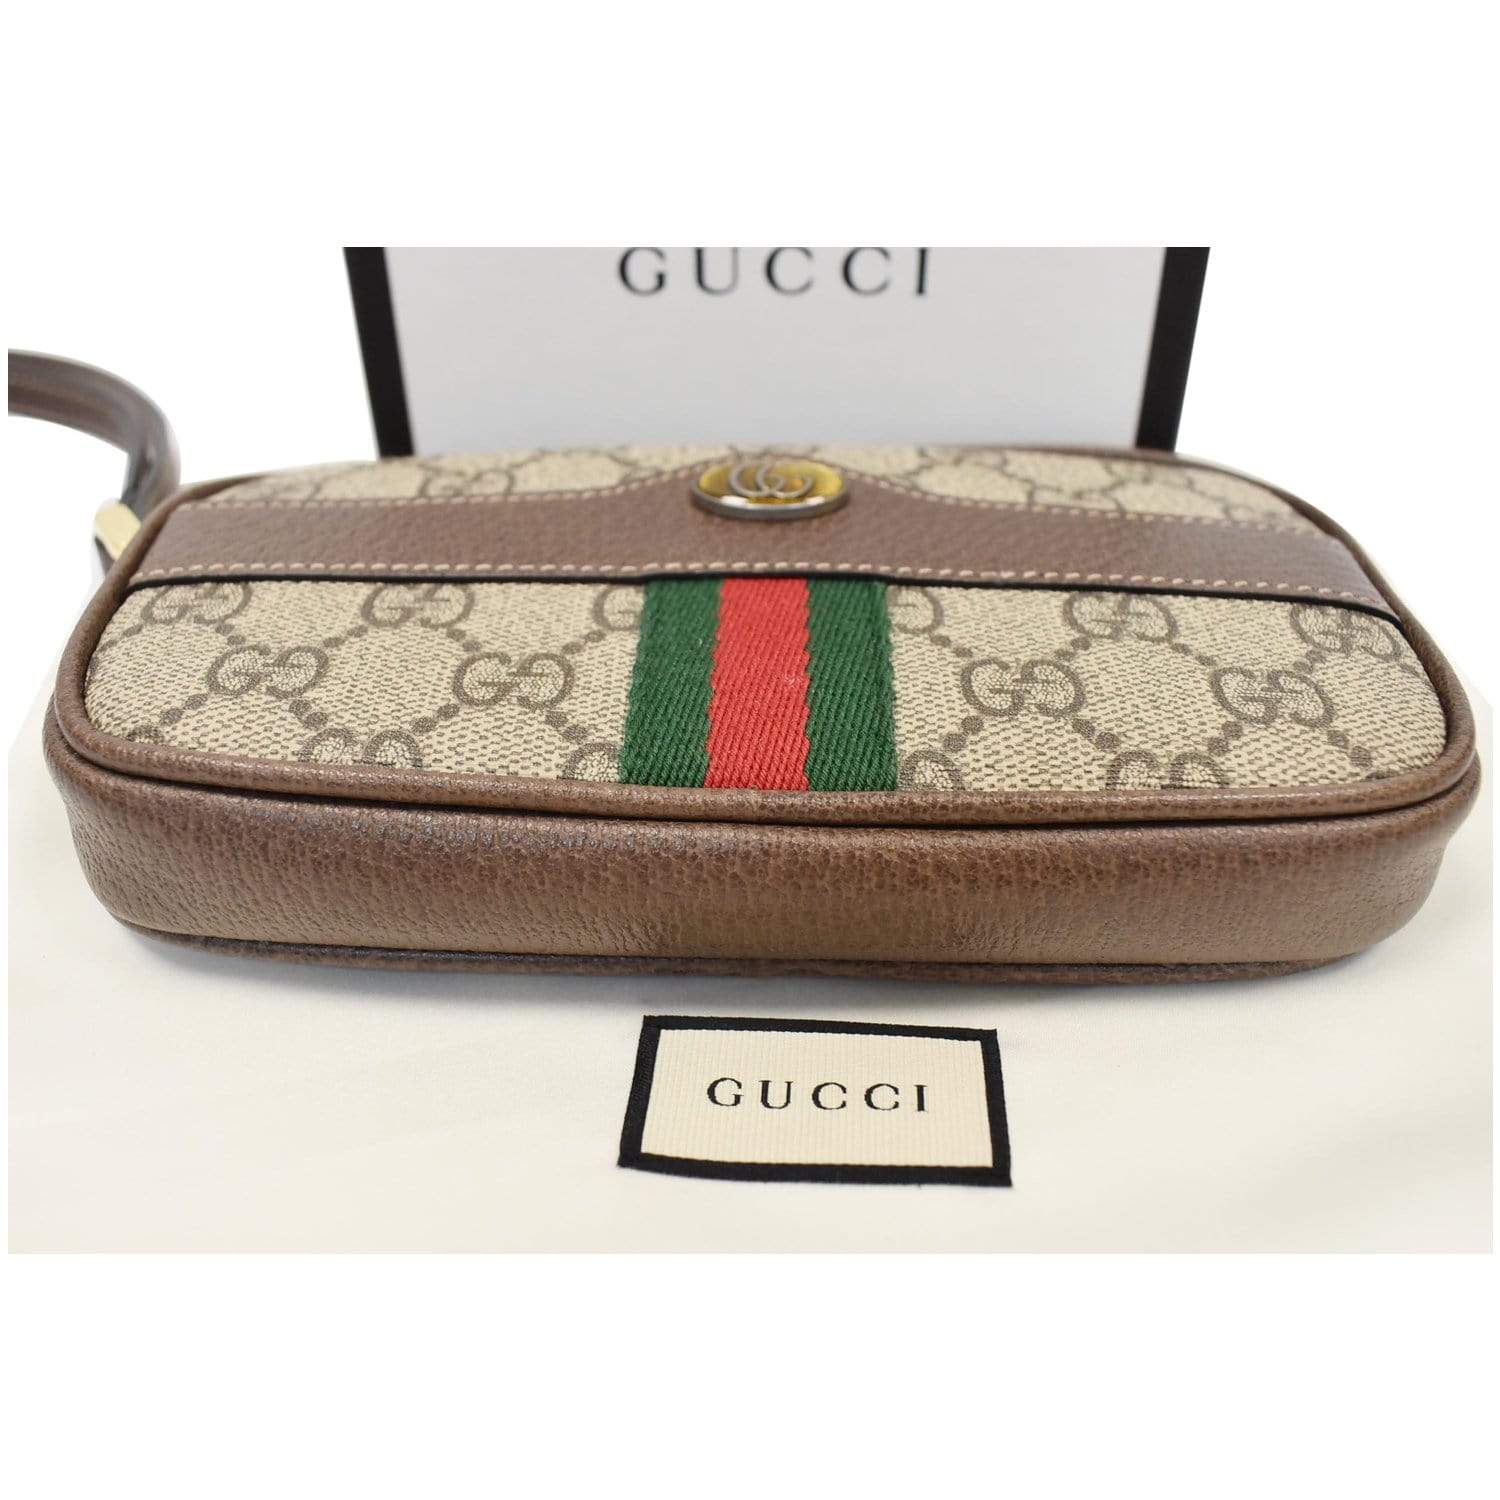 Gucci Vintage GG Ophidia Keyholder - $111 - From Pam